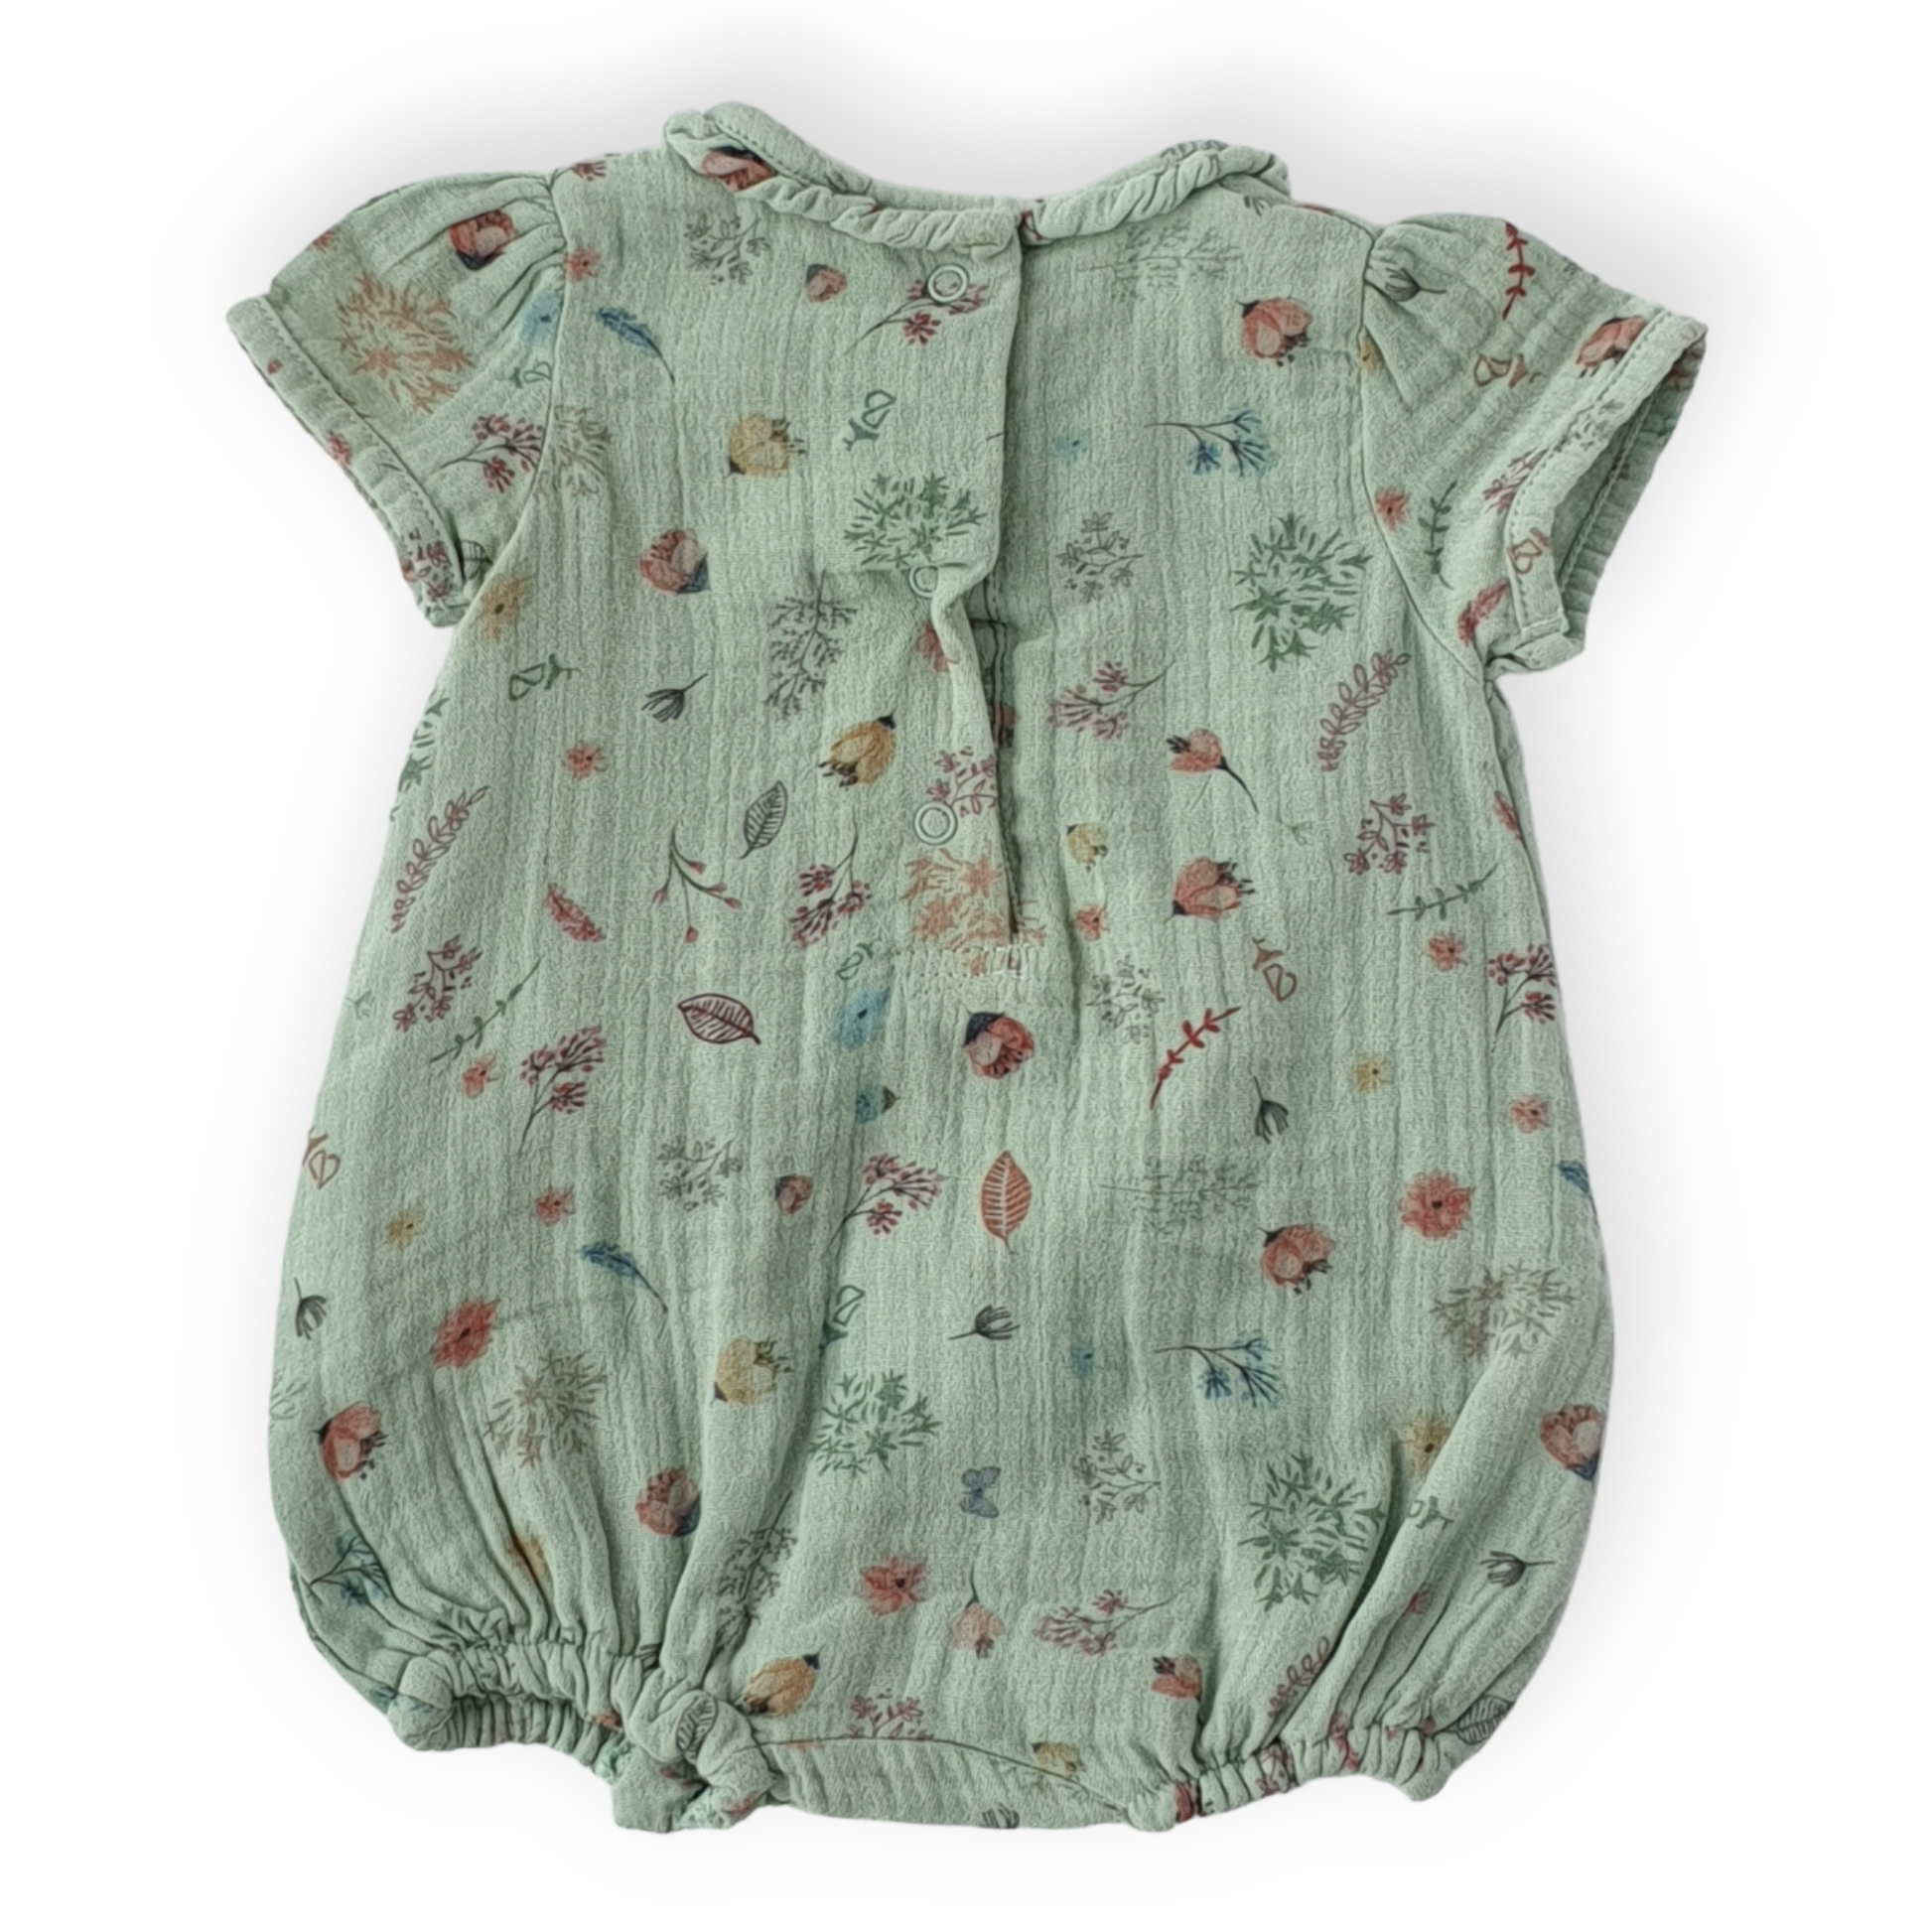 Flowers and Leaves Green Baby Girl Romper With Pockets-Catgirl, Catromper, Flowers, Girl, Green, Leaves, Romper, Short sleeve, SS23-Babydola-[Too Twee]-[Tootwee]-[baby]-[newborn]-[clothes]-[essentials]-[toys]-[Lebanon]